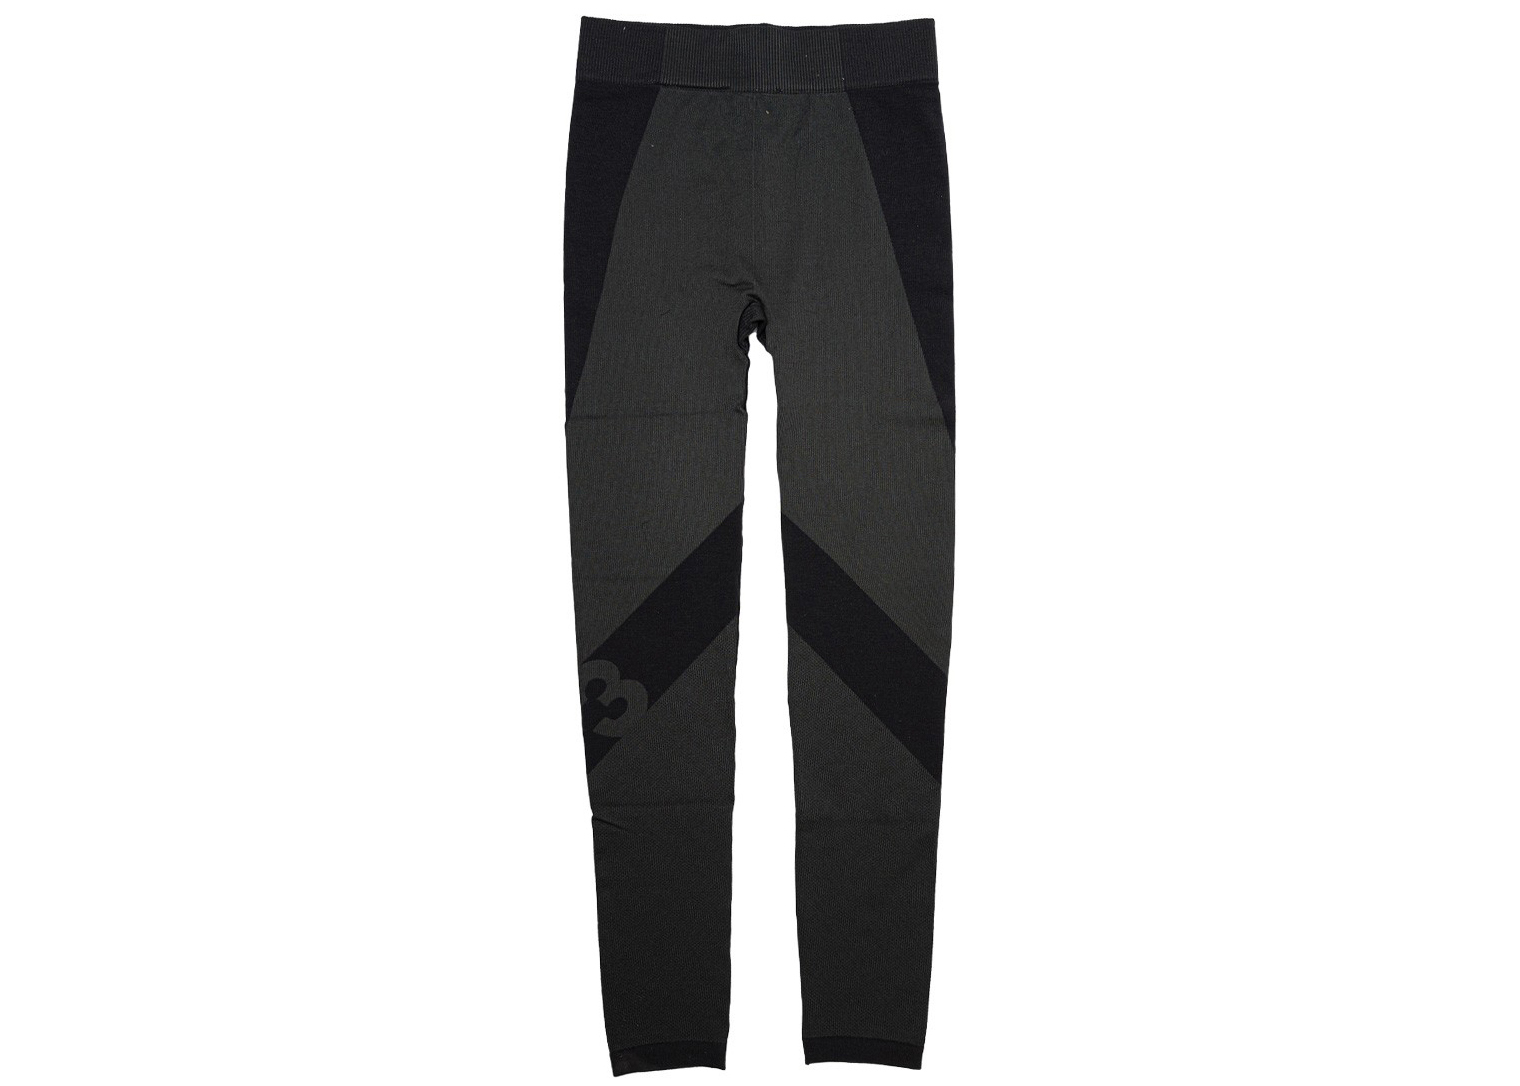 adidas Y-3 Women Classic Seamless Knit Tights Black/Carbon - US